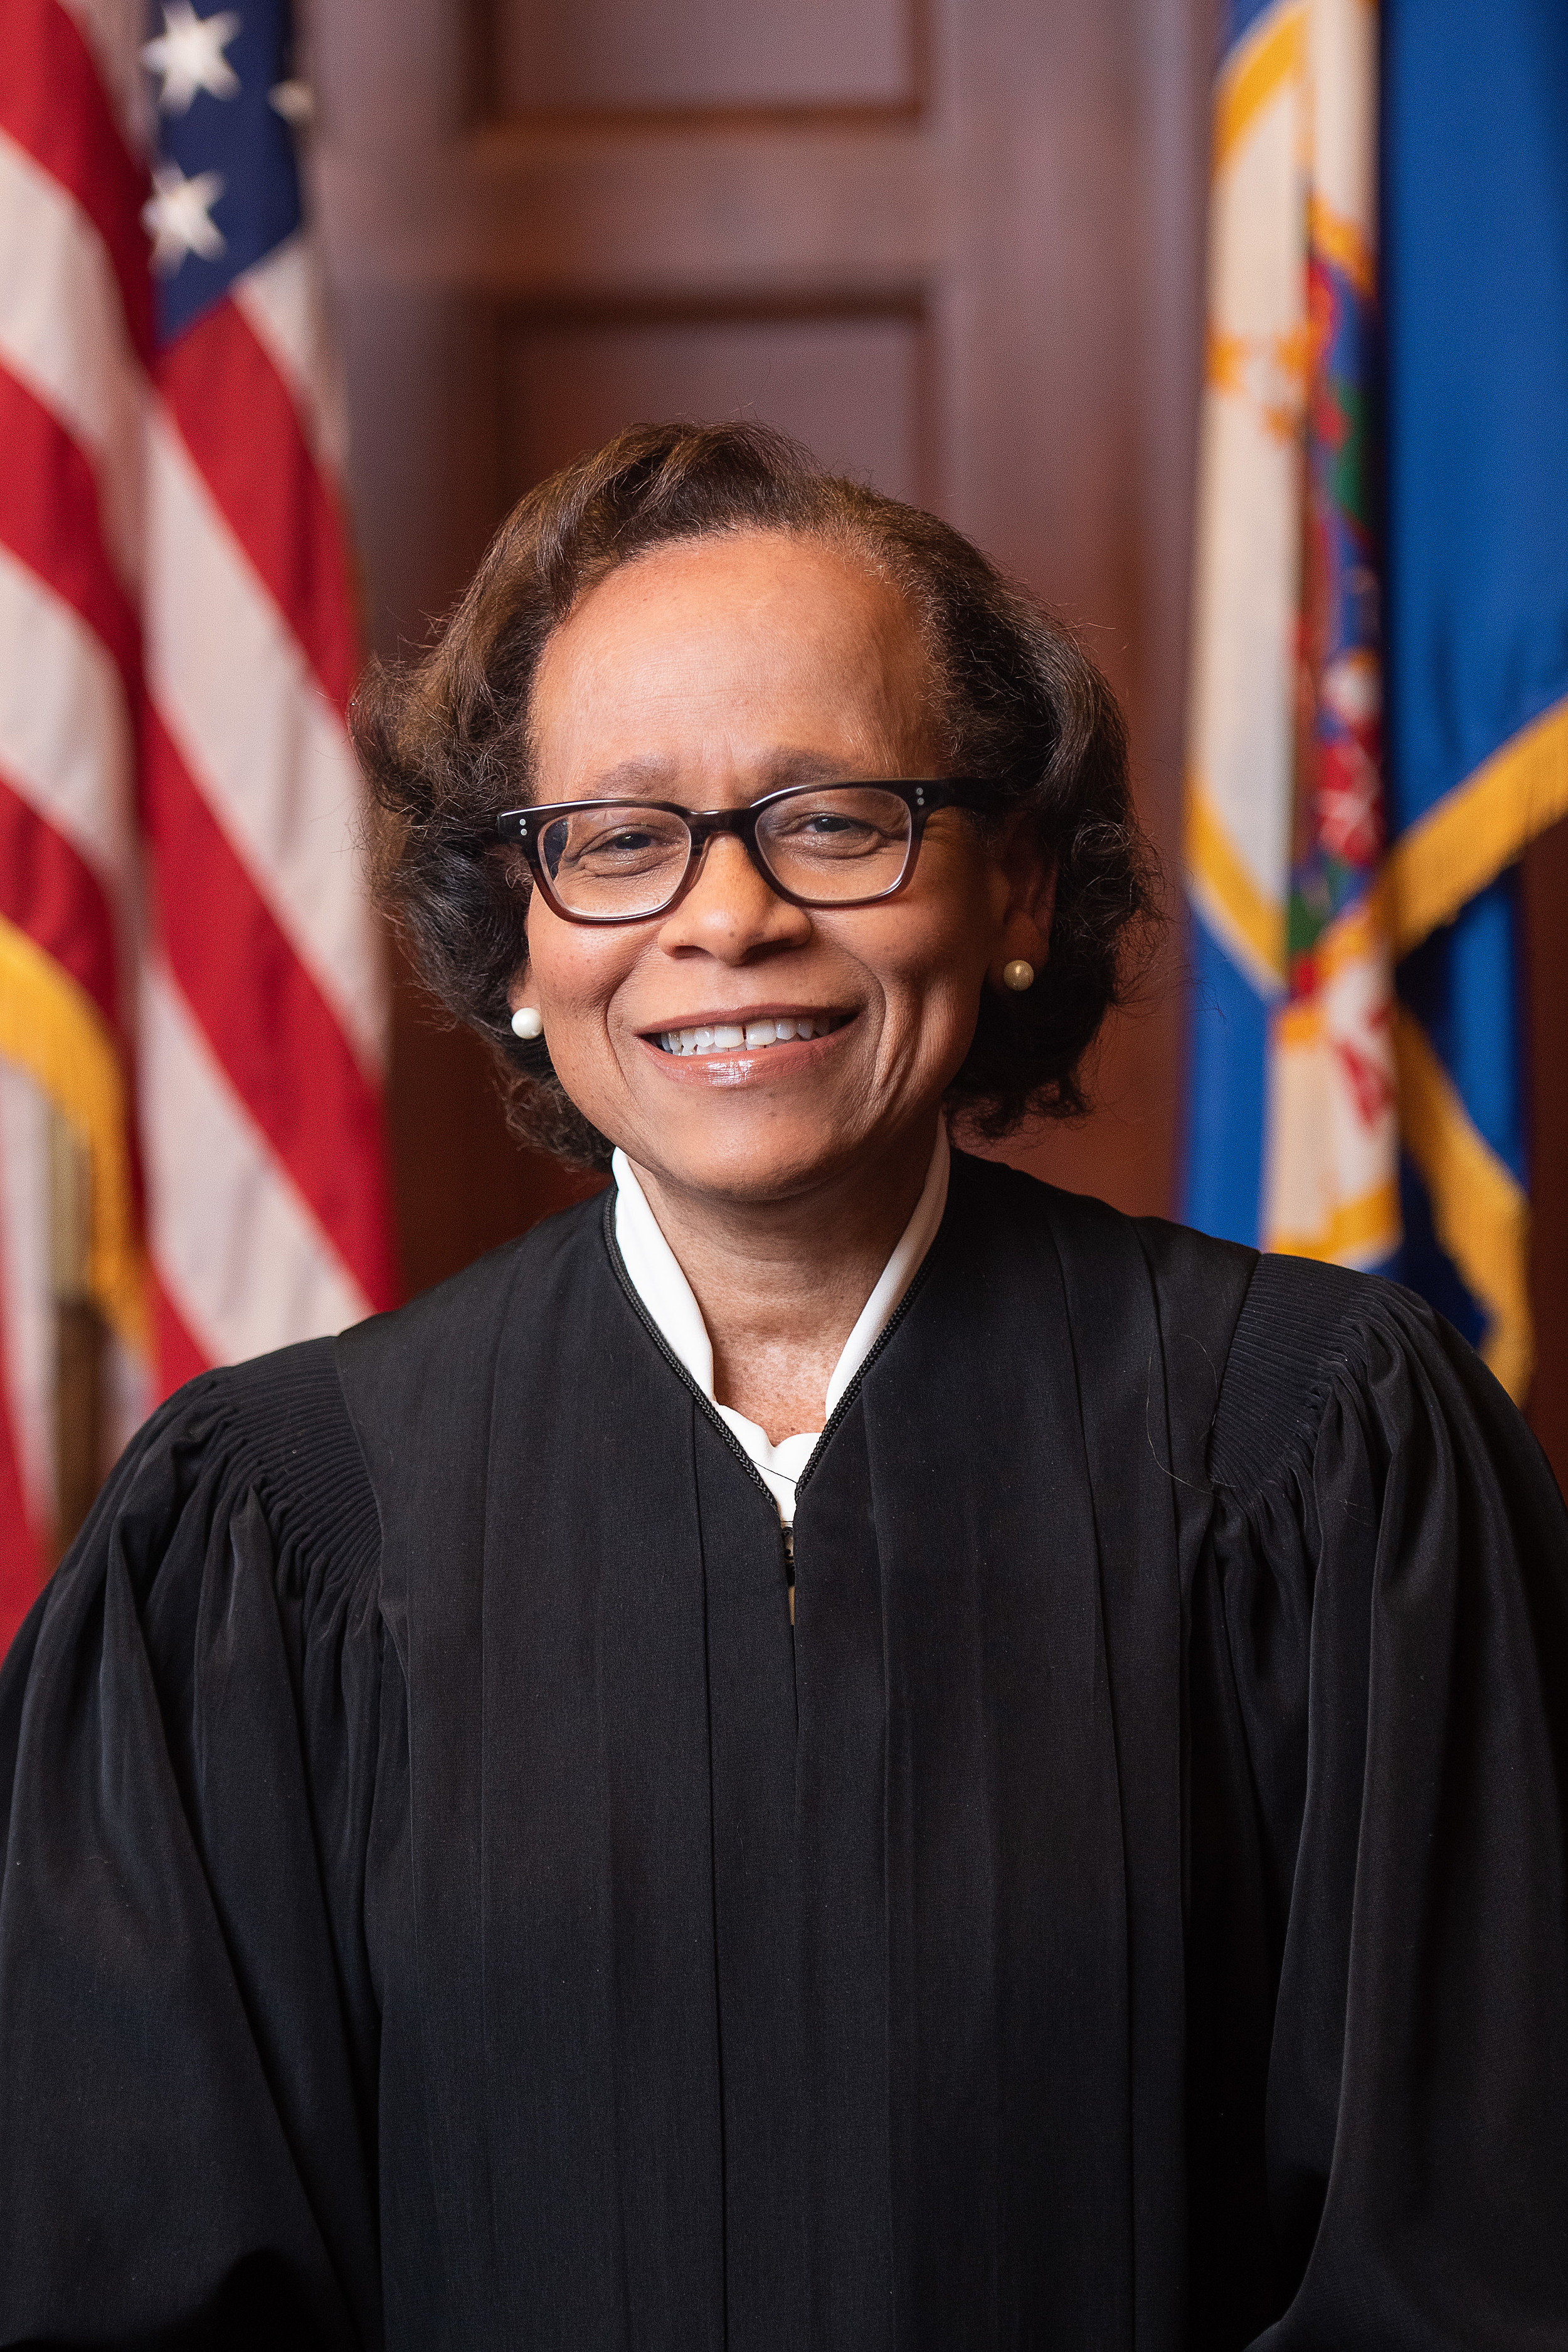 Minnesota names first Black chief justice of state Supreme Court,
Natalie Hudson